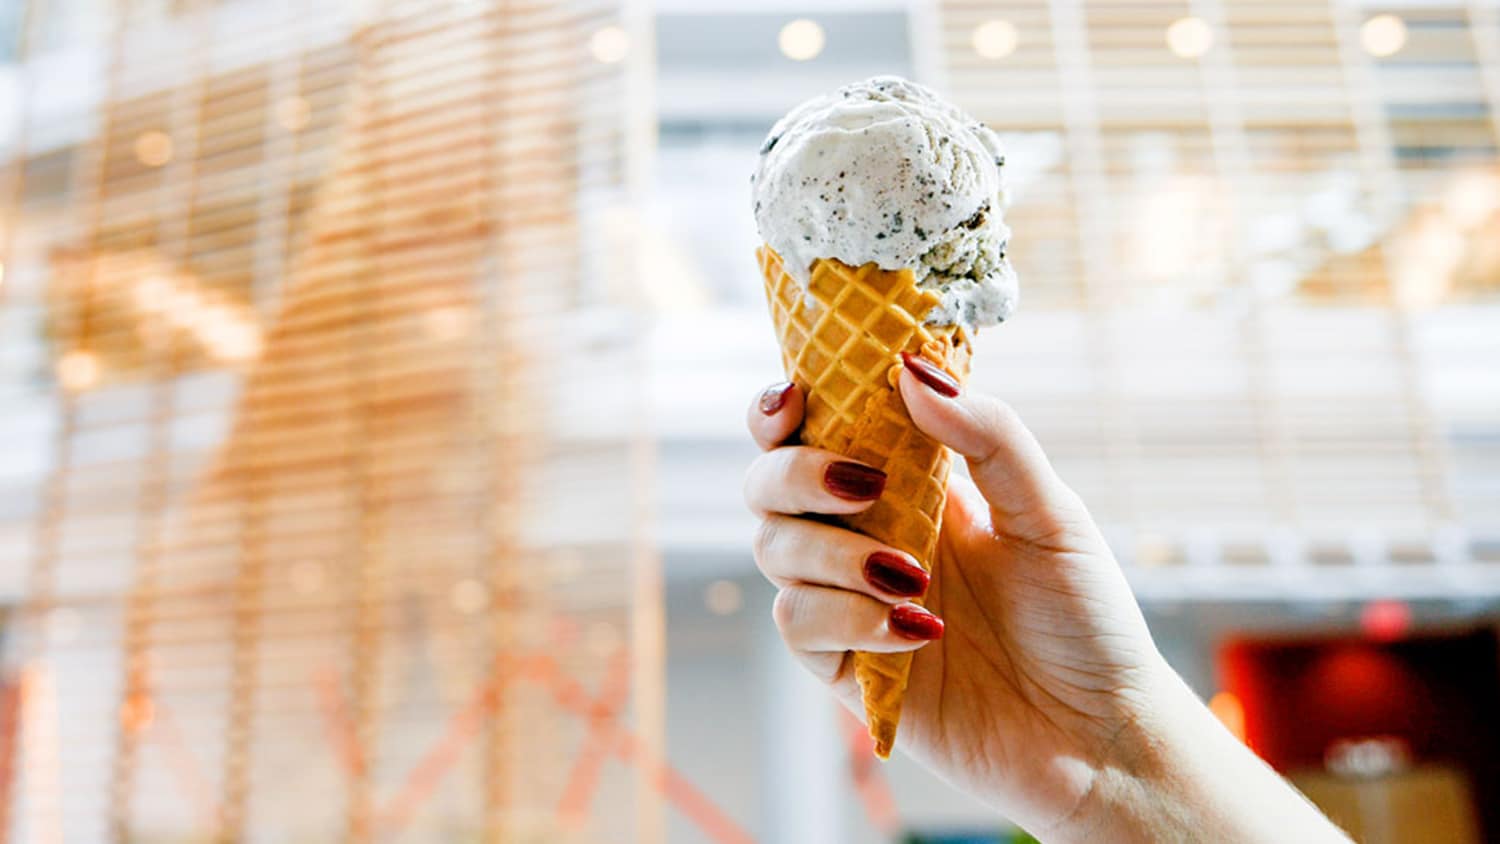 A scoop of cookies and cream ice cream in a waffle cone.